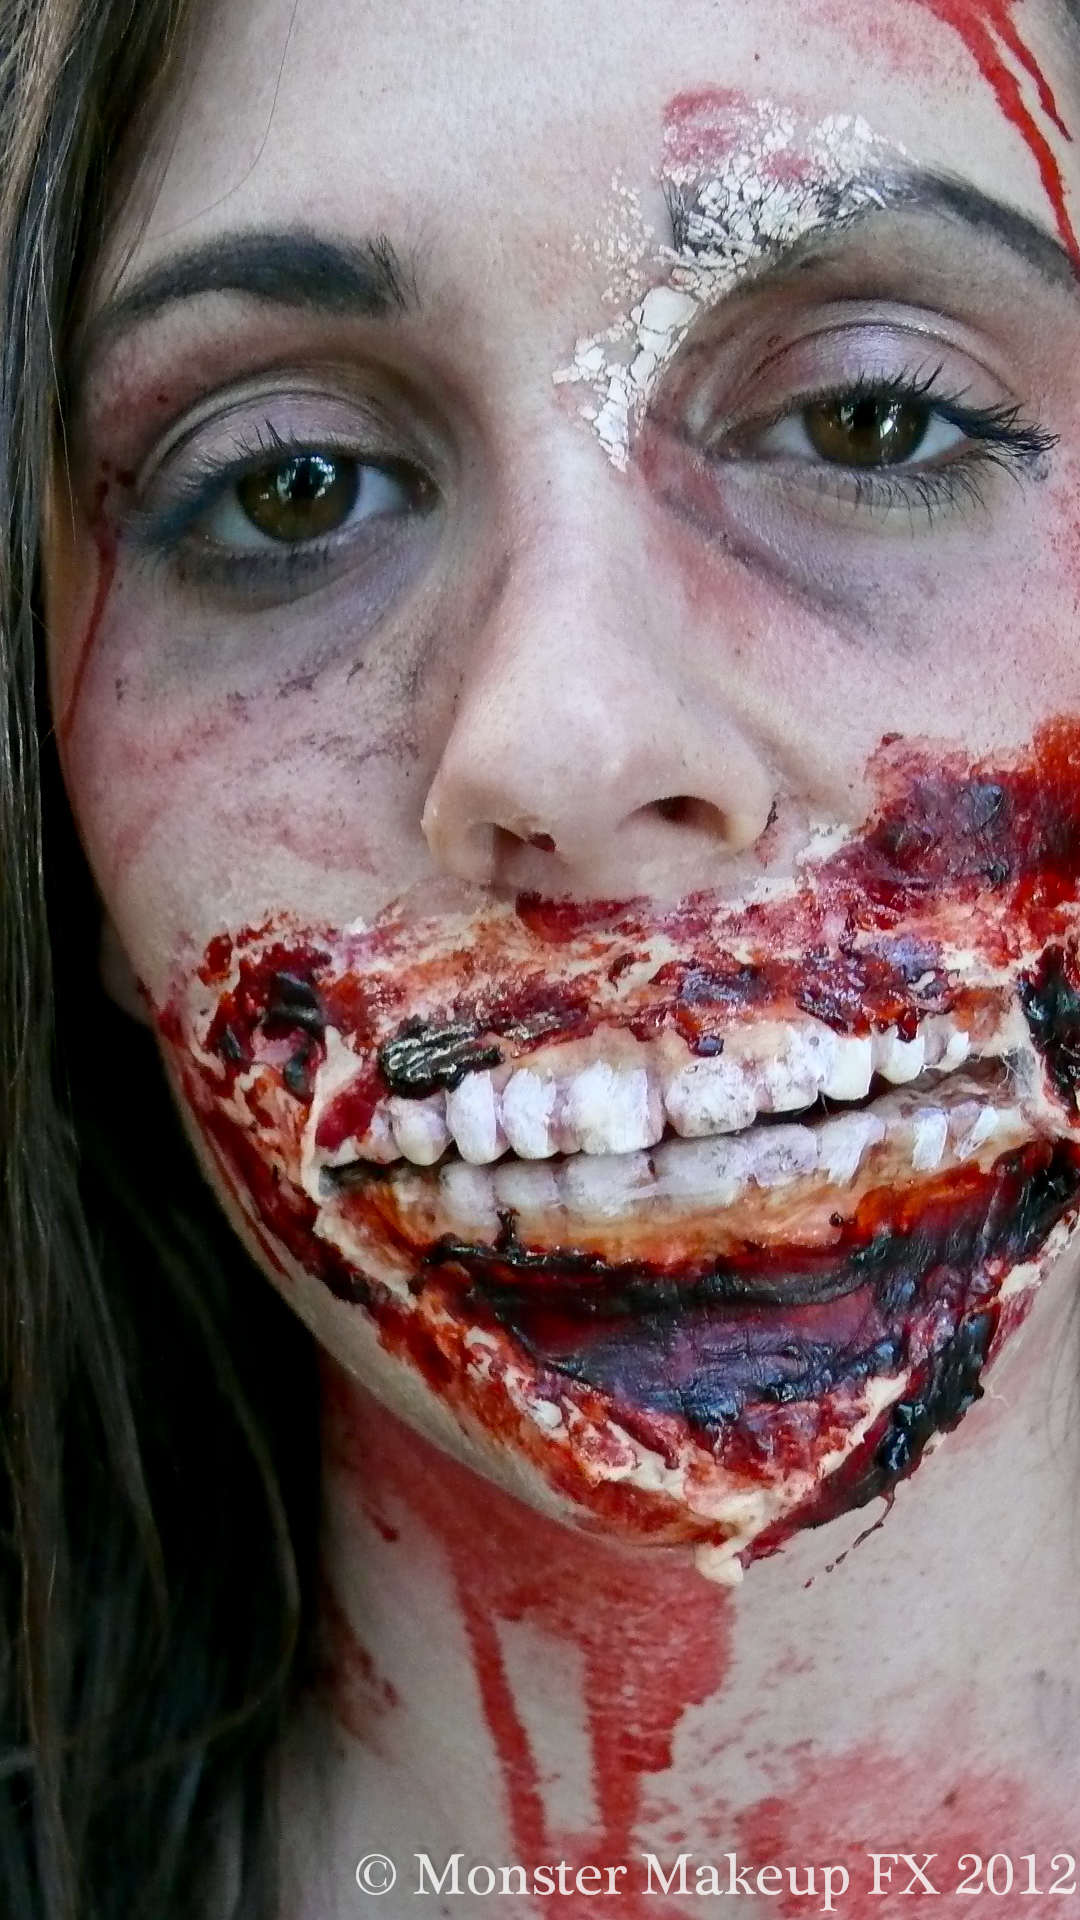 One of 20 individual 10-15 min zombie makeups for The Walking Dead Denver CO promotional event Halloween 2011.